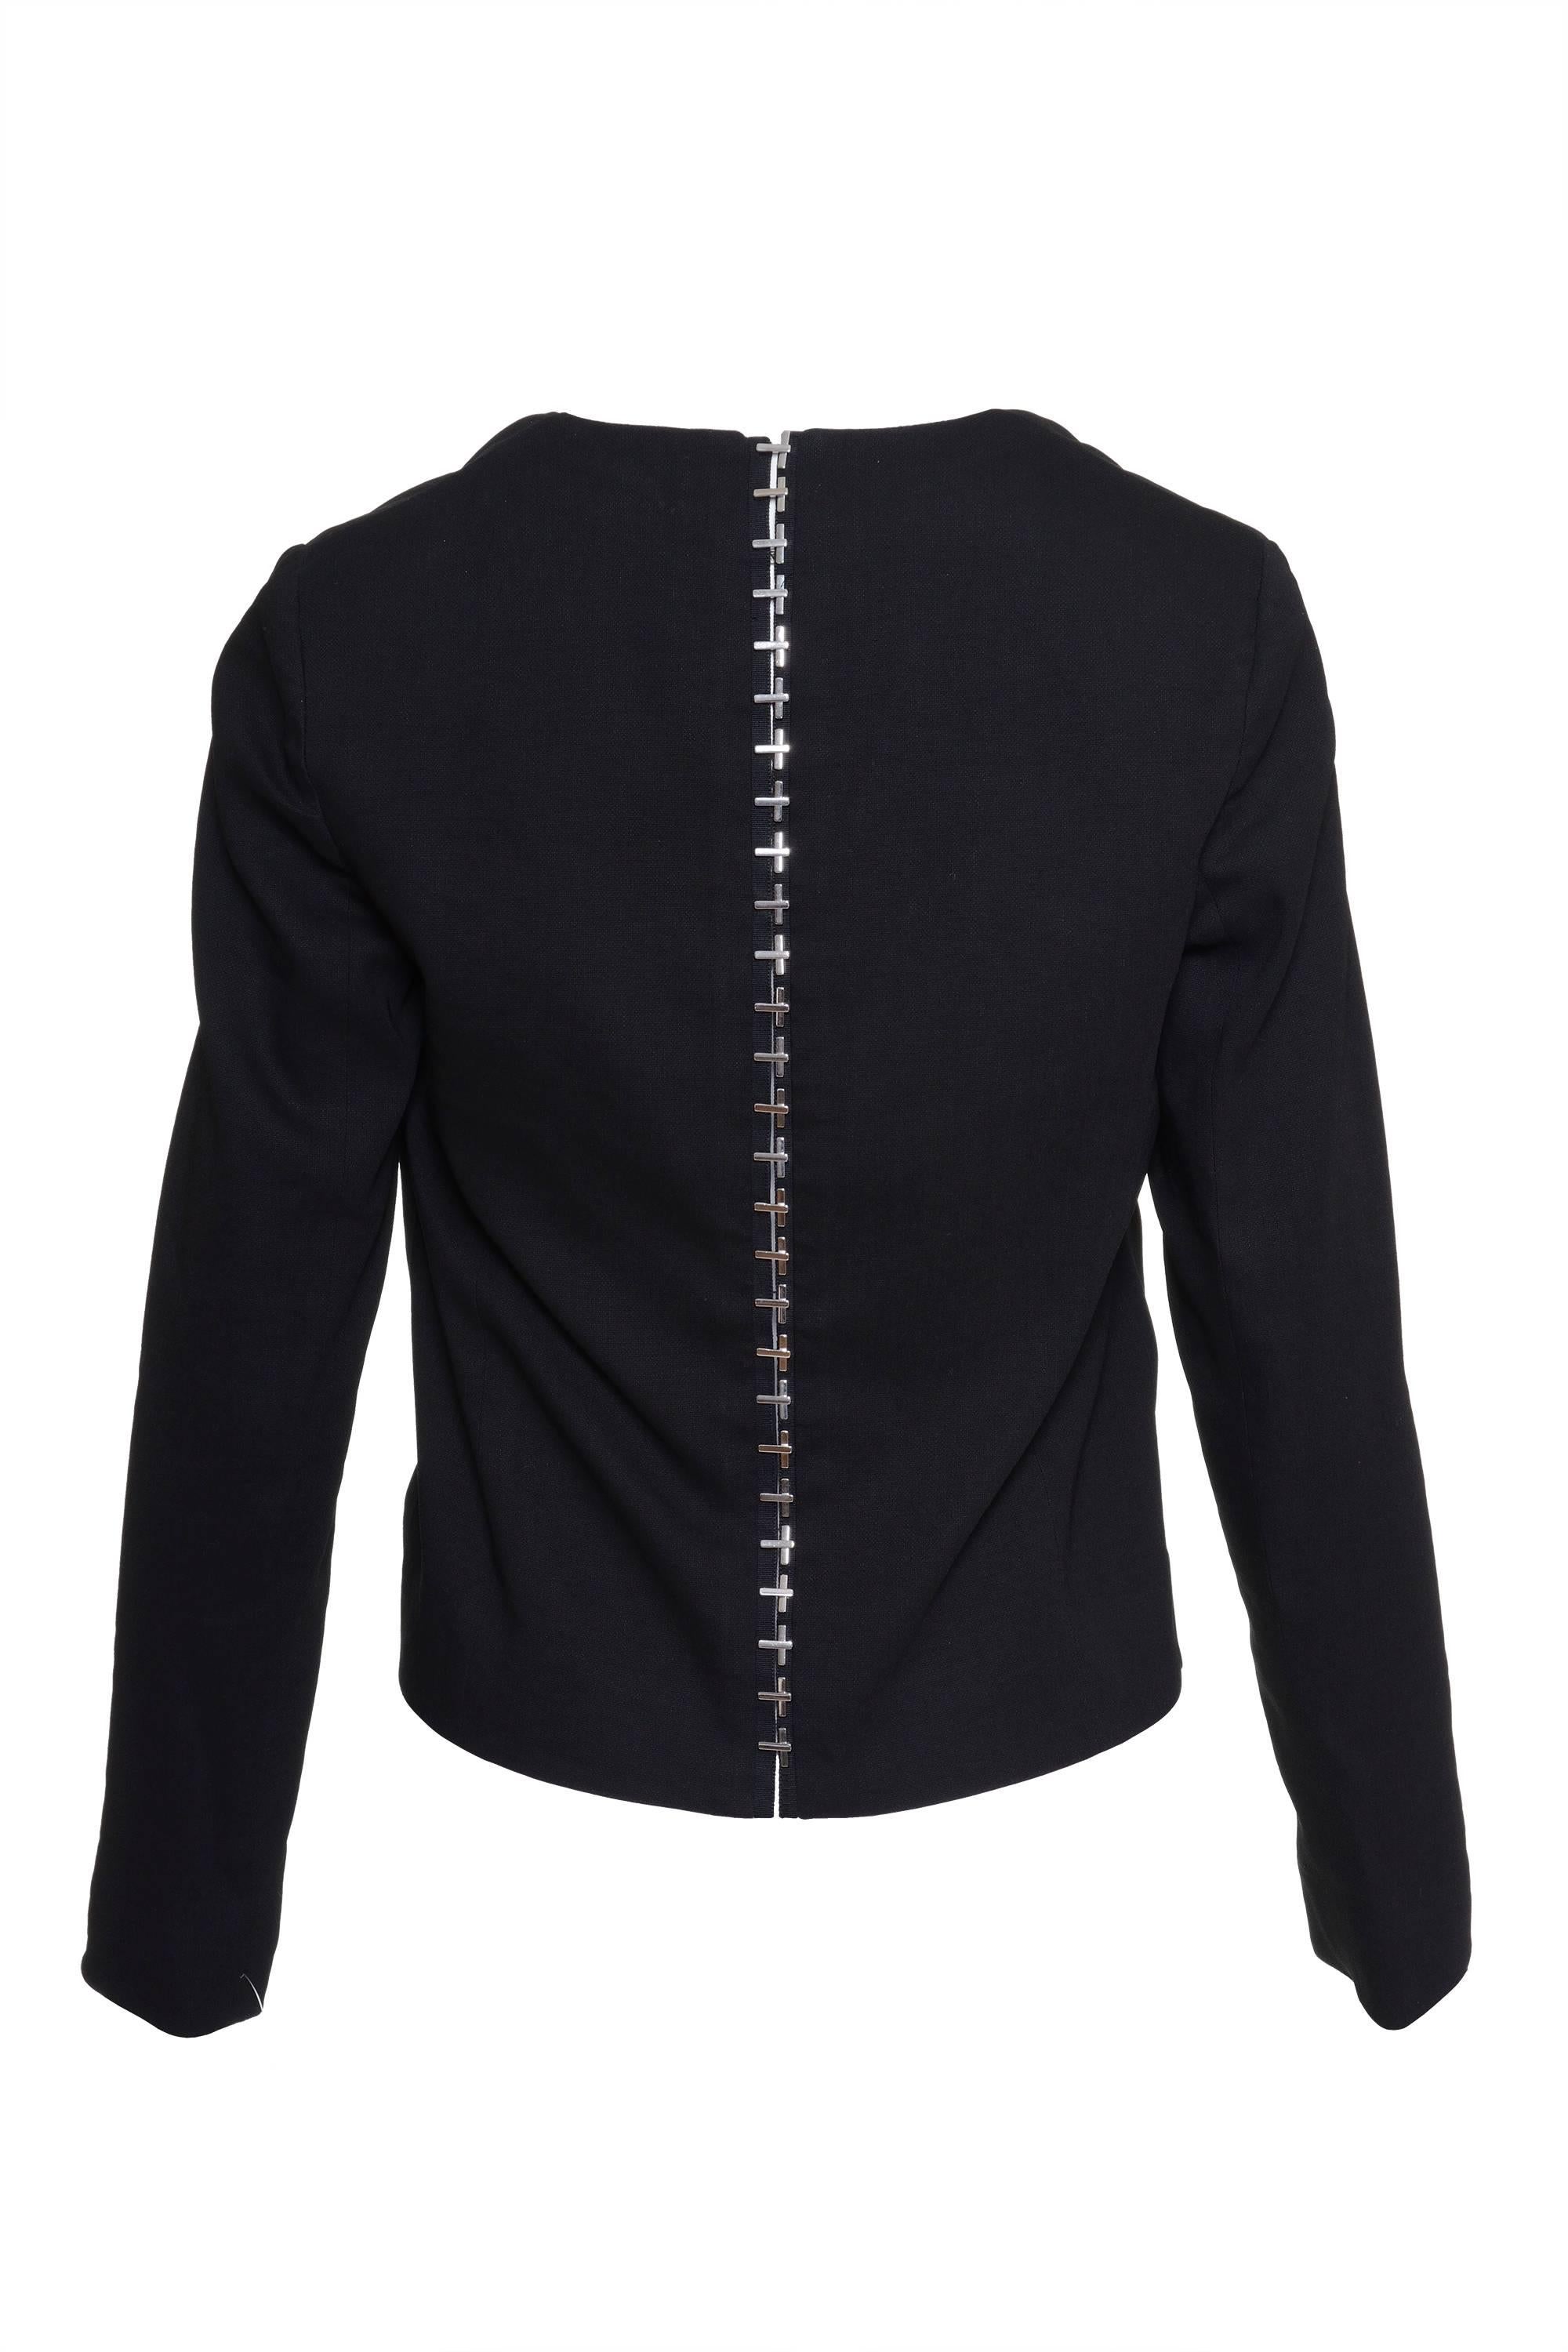 This amazing black tie waist jacket by VERSACE has two front jetted pockets, shoulder pads, tailor seam, two-piece sleeves, and a line of special metal details hook and bars from the neck to the hem. It has a chain label and is made in